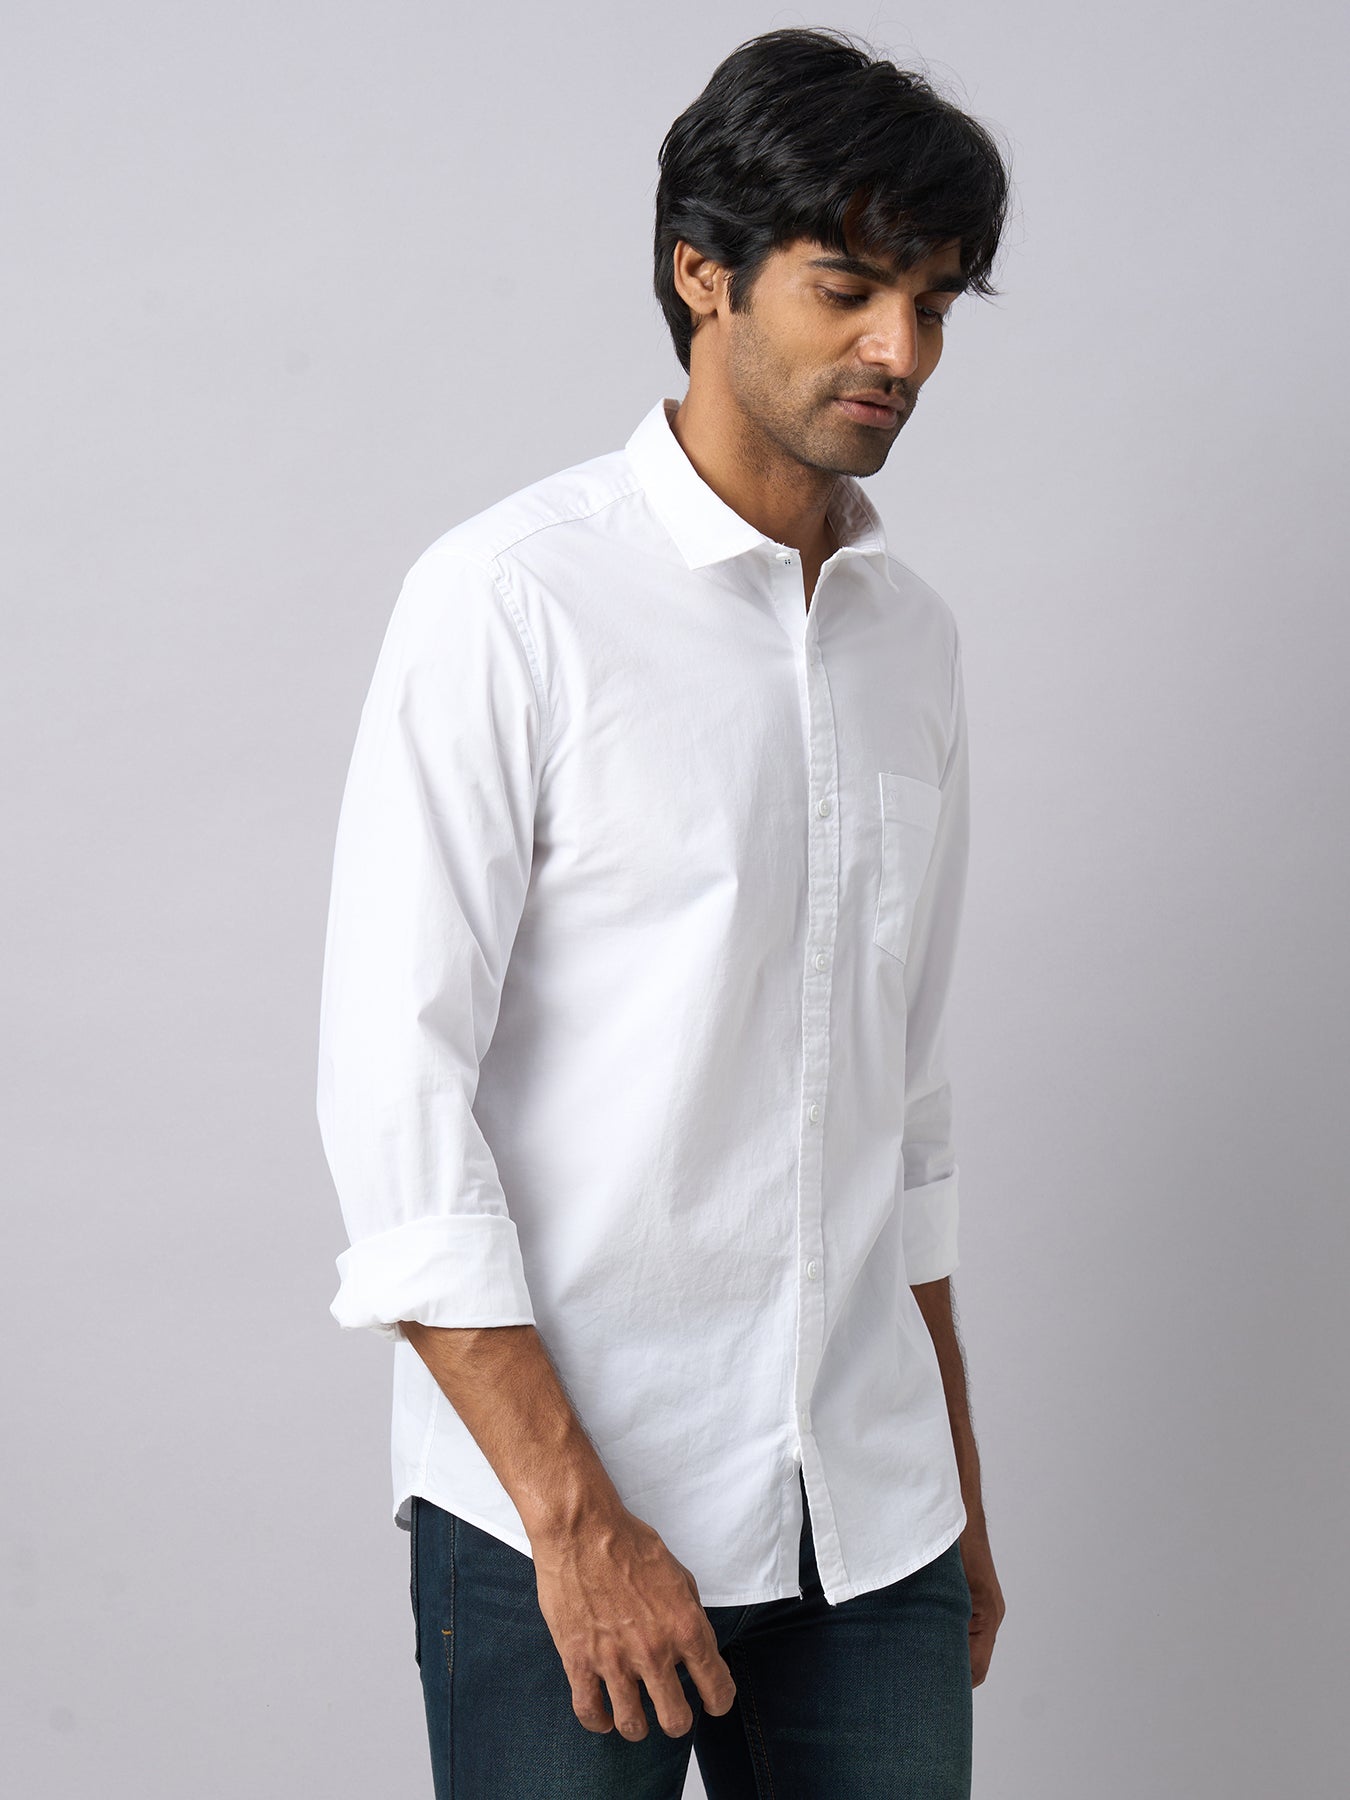 Cotton Stretch White Plain Slim Fit Full Sleeve Casual Shirt